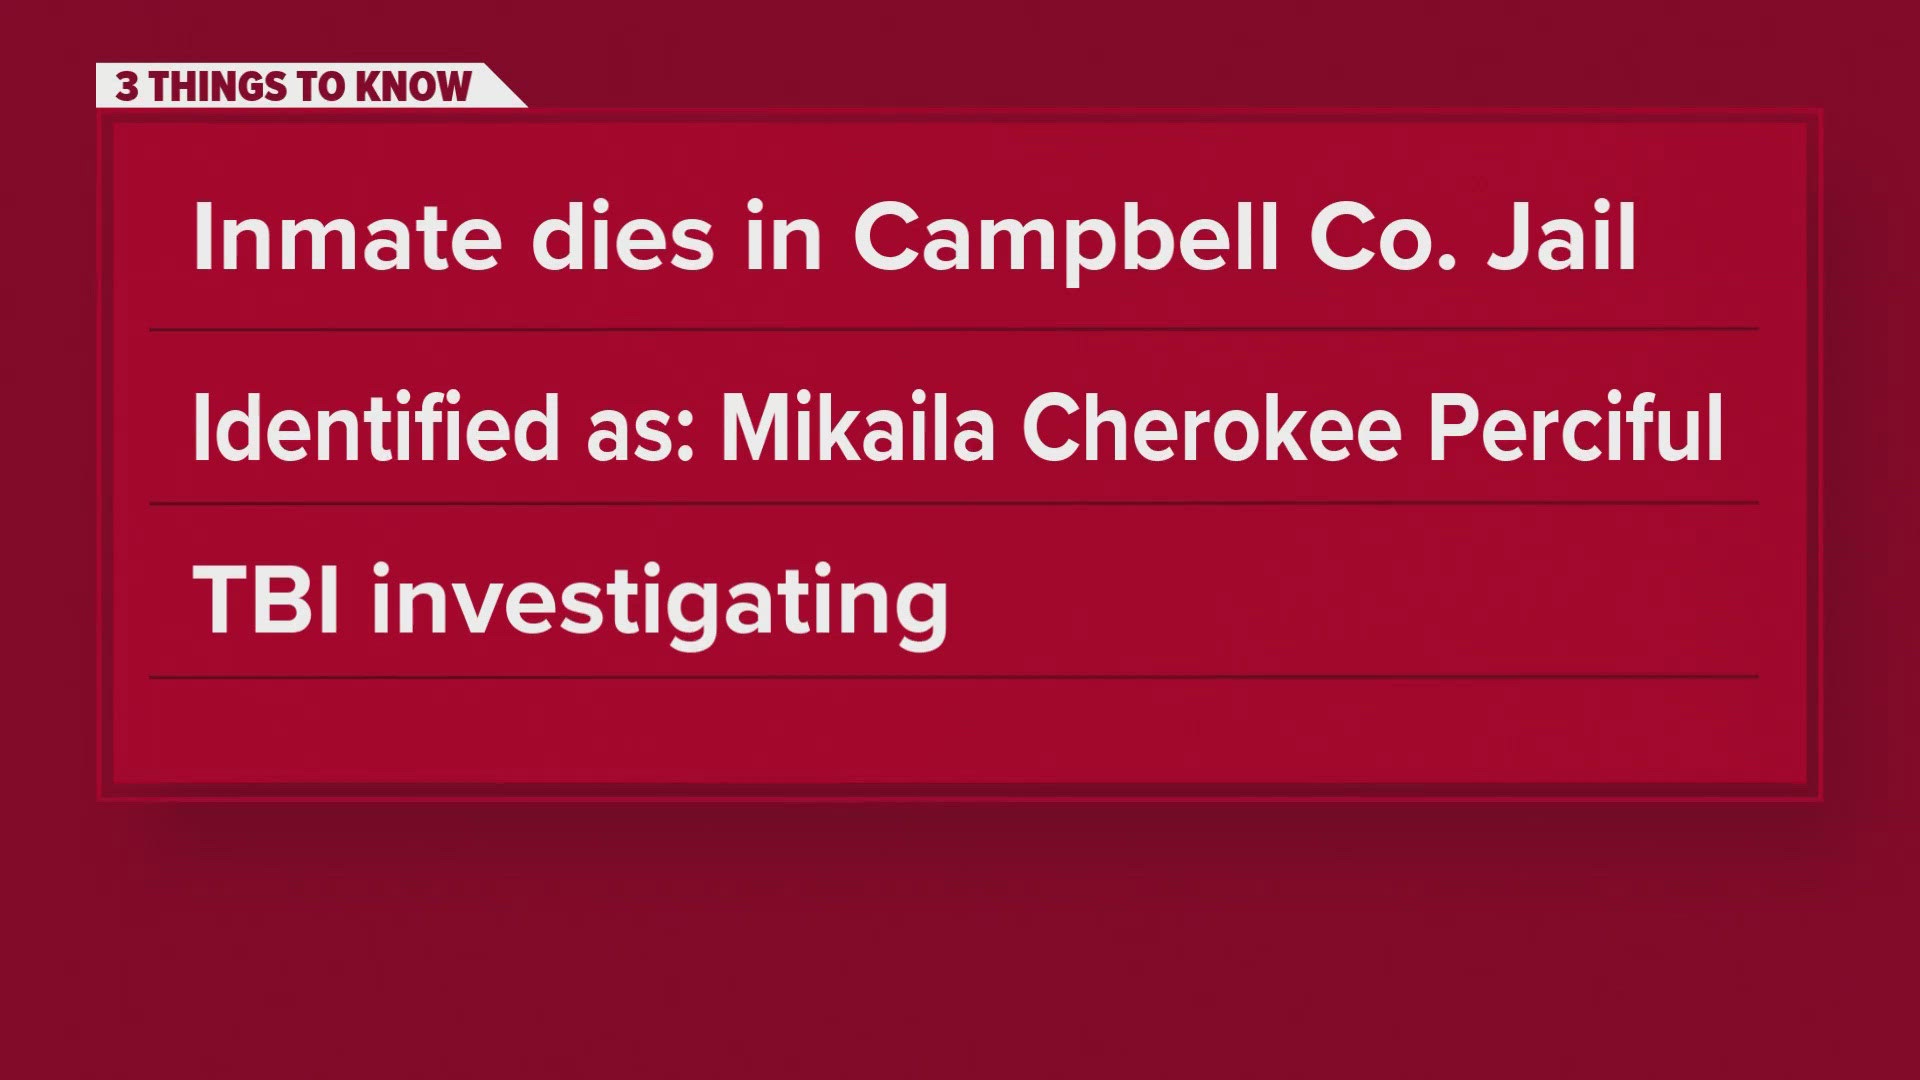 The Tennessee Bureau of Investigation said an inmate died Thursday morning at the Campbell County Jail.